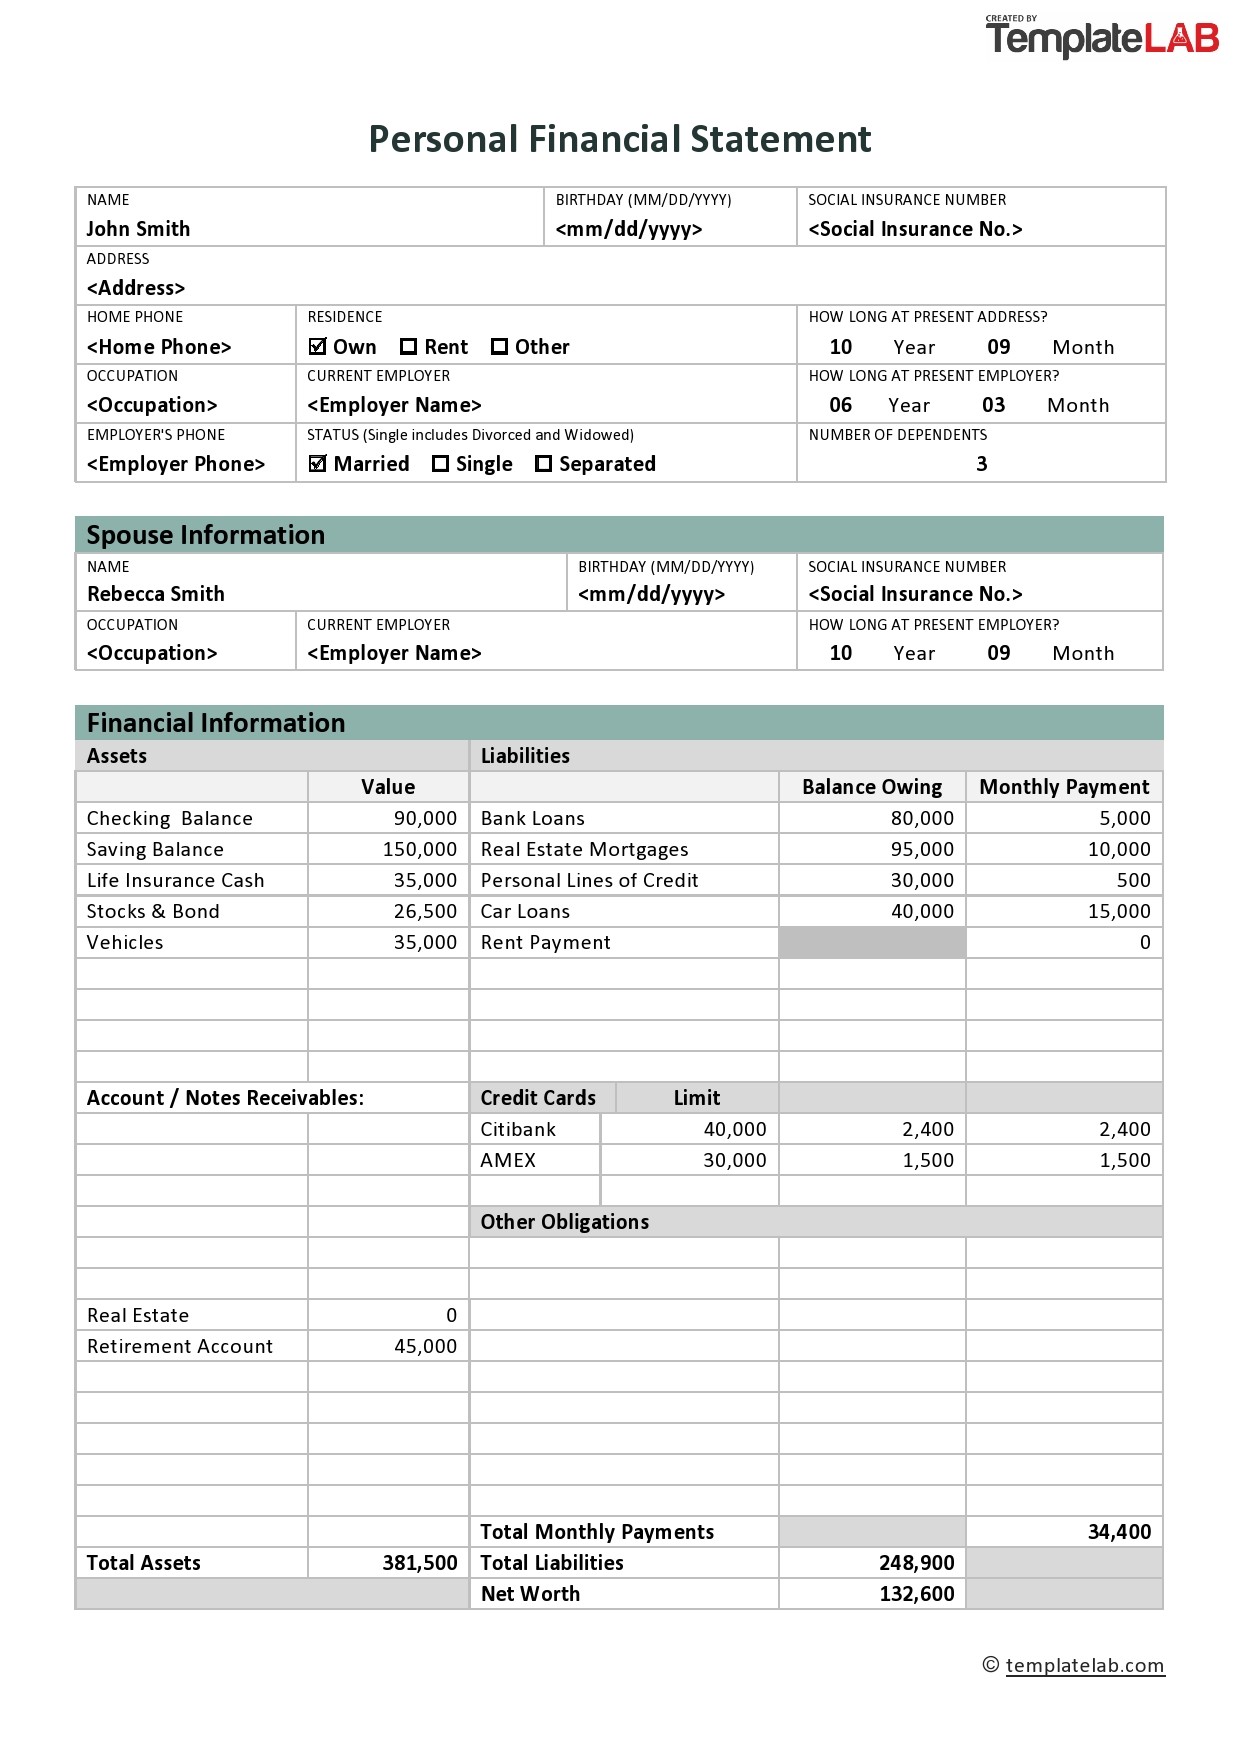 personal financial statement notes